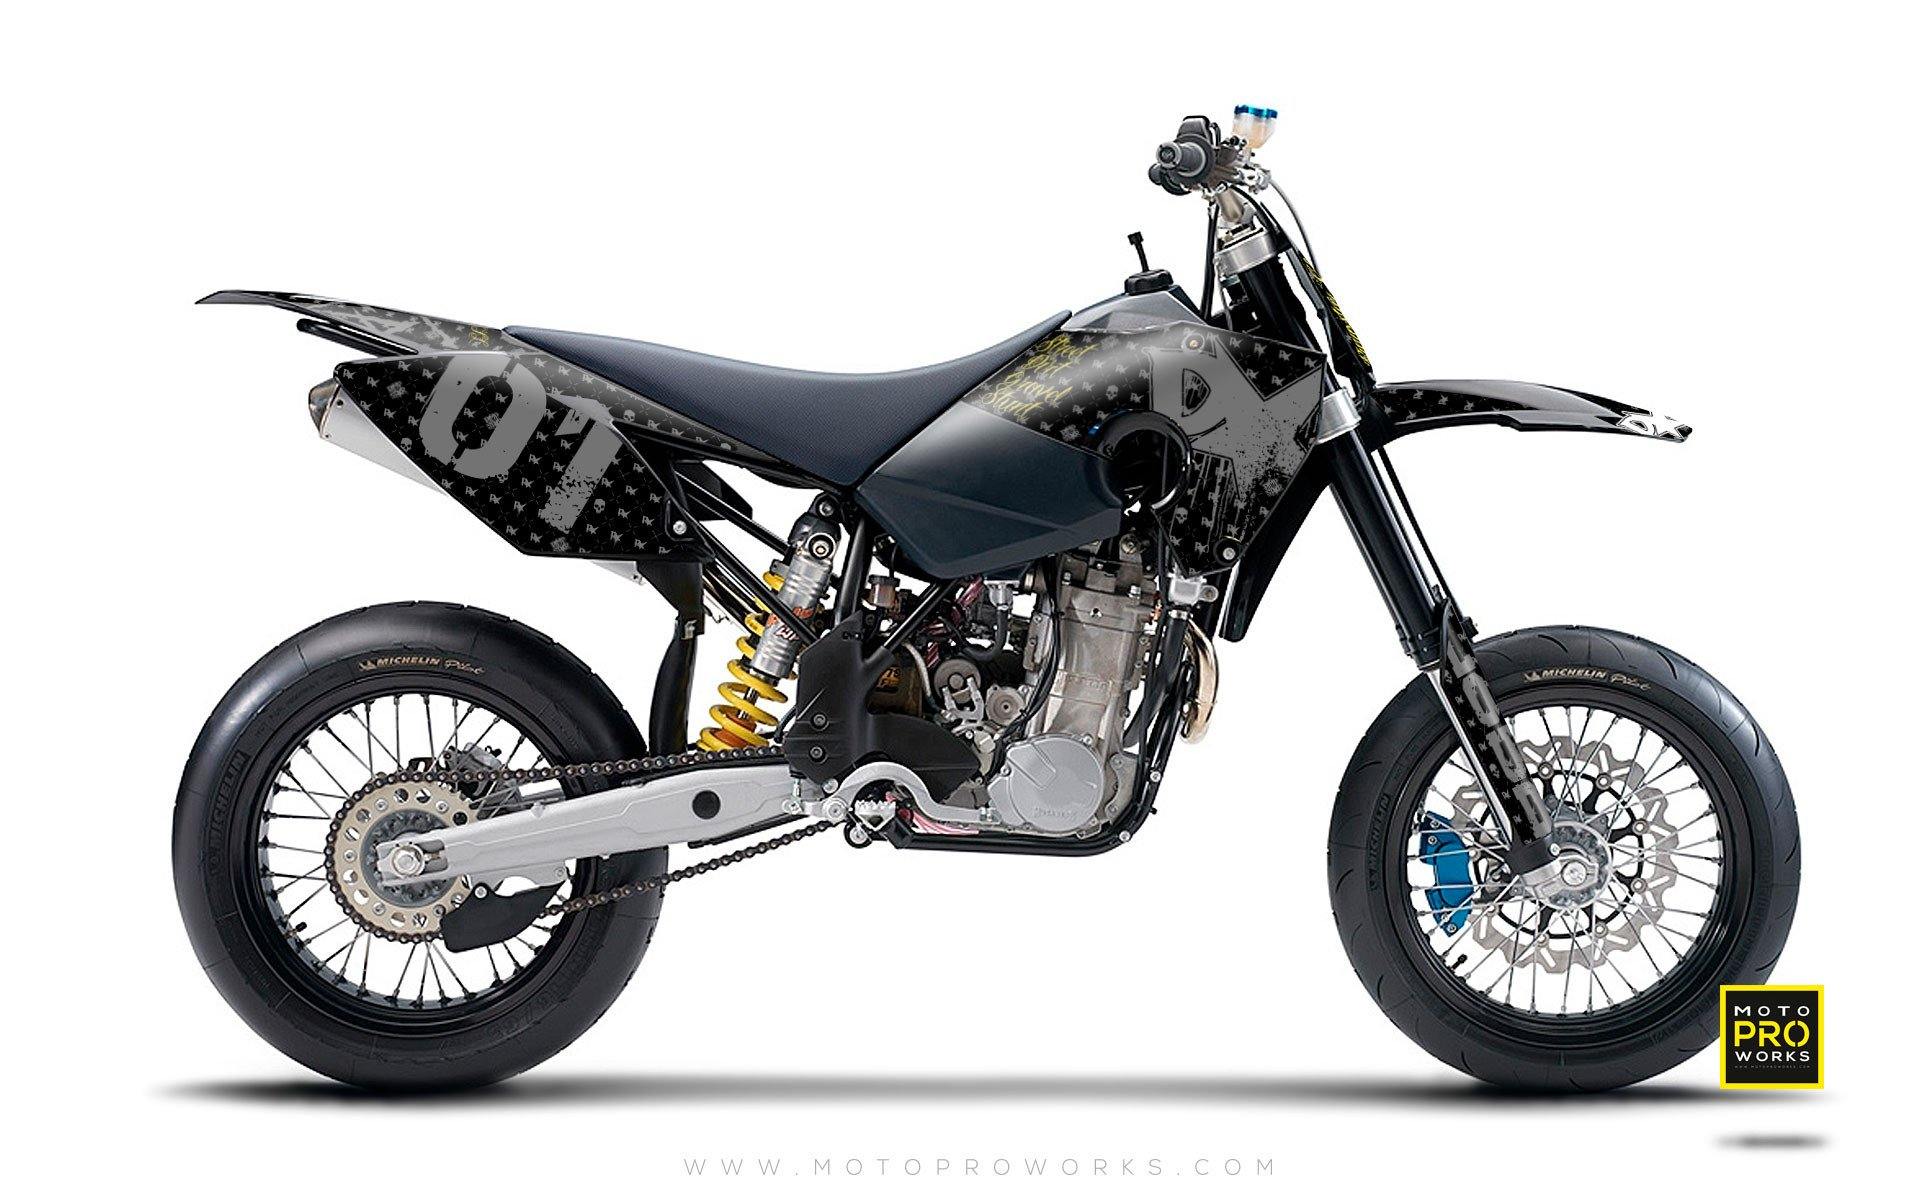 Husaberg GRAPHIC KIT - "STEALTHER" (black) - MotoProWorks | Decals and Bike Graphic kit